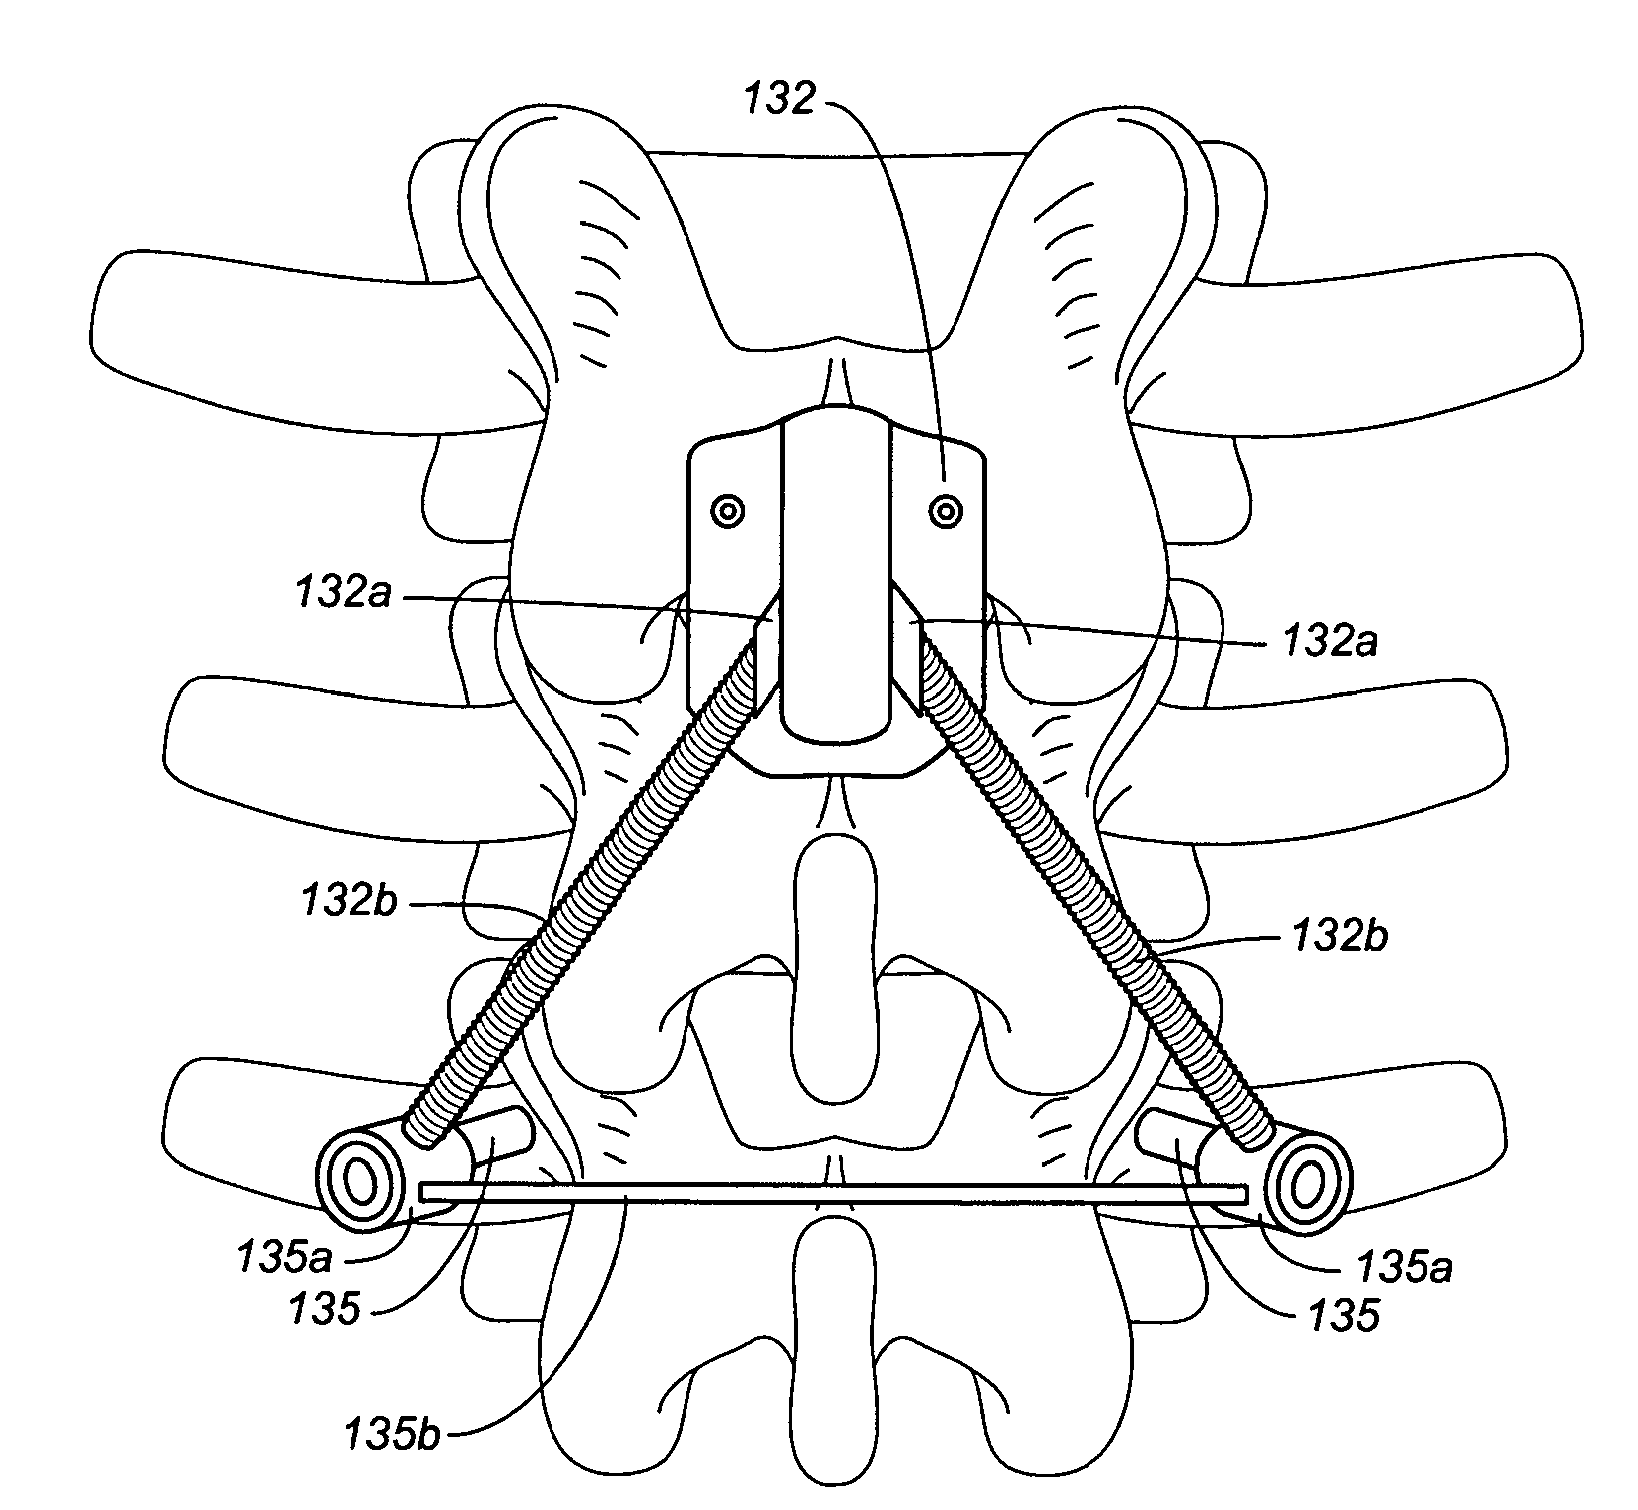 Device and method for correcting a spinal deformity